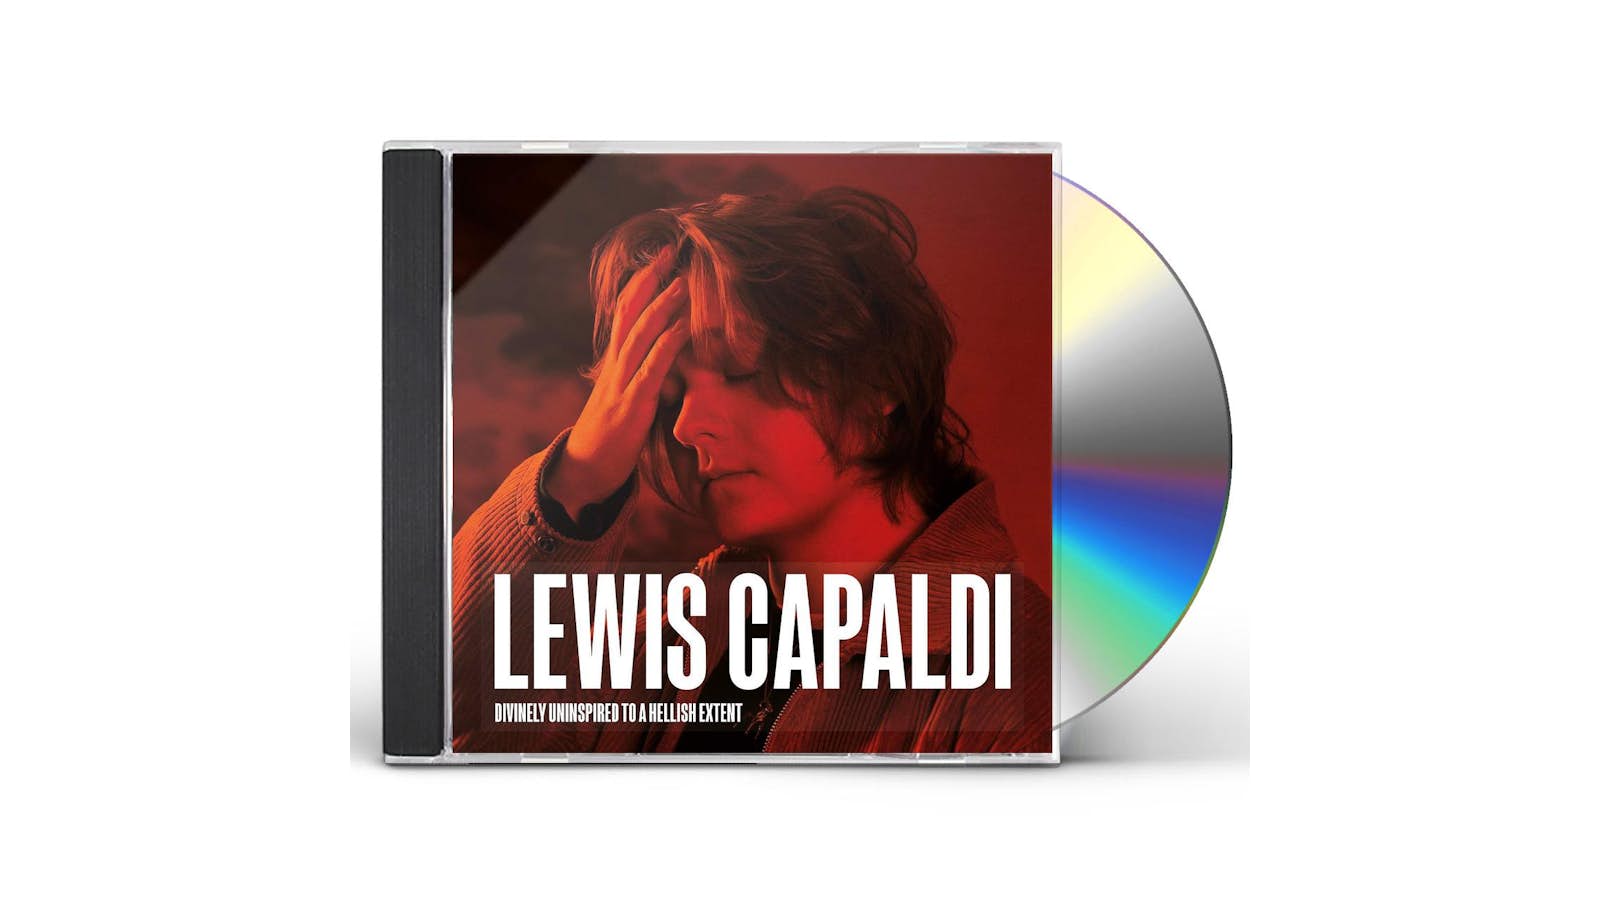 Lewis Capaldi - Divinely Uninspired To A Hellish Extent: Finale [2